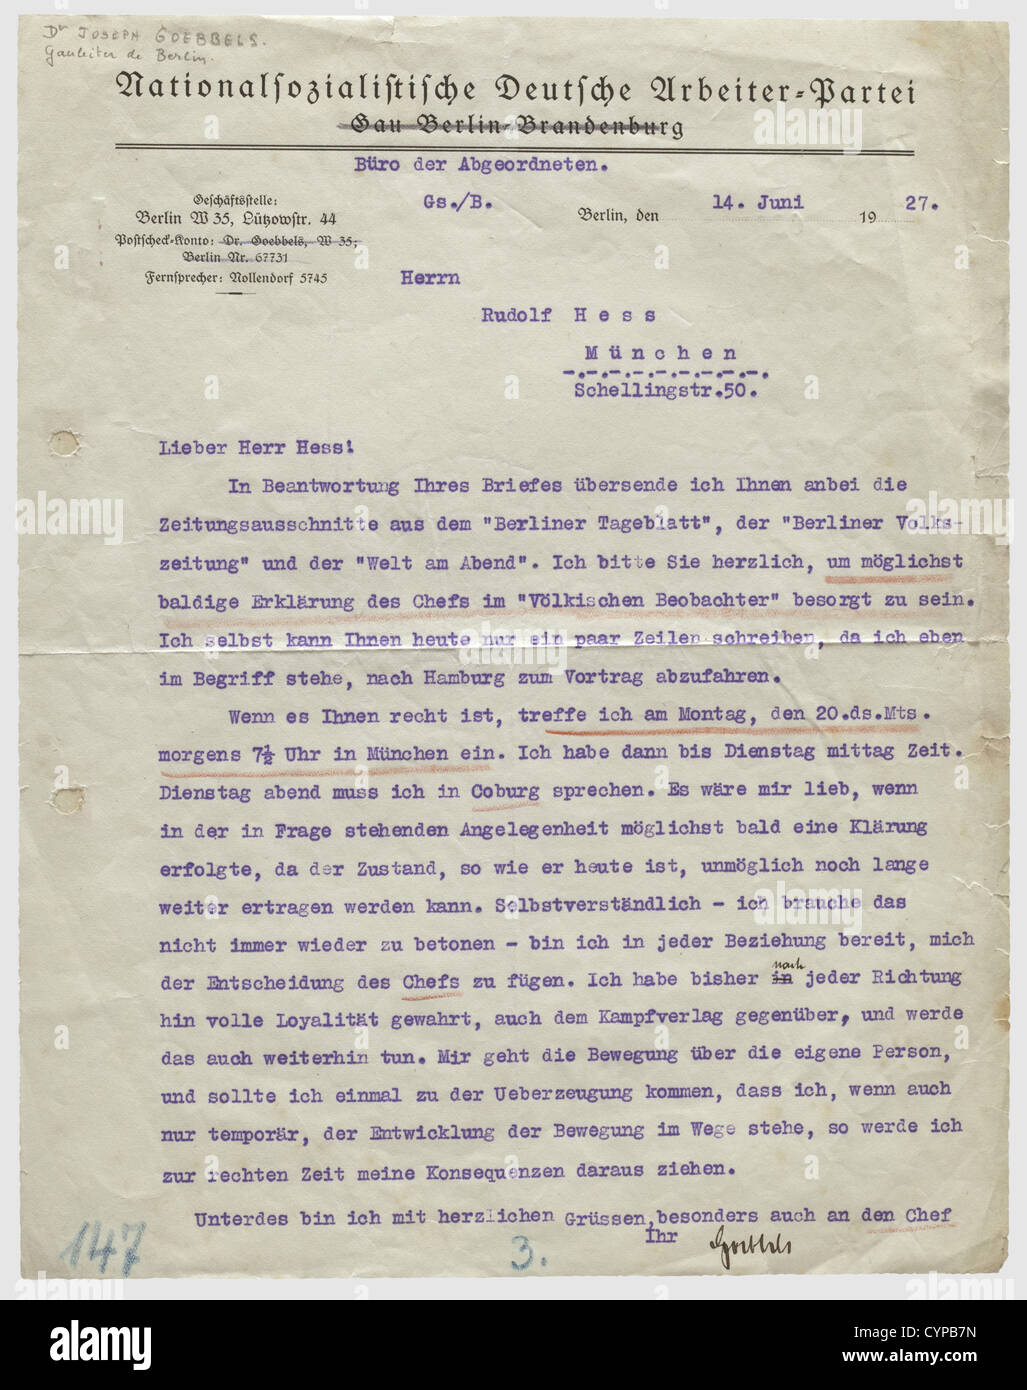 Joseph Goebbels,Signed Letter to Rudolf Heß dated 14 June 1927 Typewritten copy with printed letterhead 'Nationalsozialistische Deutsche Arbeiter=Partei - Gau Berlin-Brandenburg'.Goebbels sends Heß Berlin newspaper clippings for further transmission to 'Chef'(in reference to Hitler)regarding the(transl.)'matter in question' to be cleared up as quickly as possible '...because it will be impossible to endure current situation any longer...'.He closes obsequiously 'Of course ...I am prepared in all respects to yield to decision of Chief ...,Additional-Rights-Clearences-Not Available Stock Photo